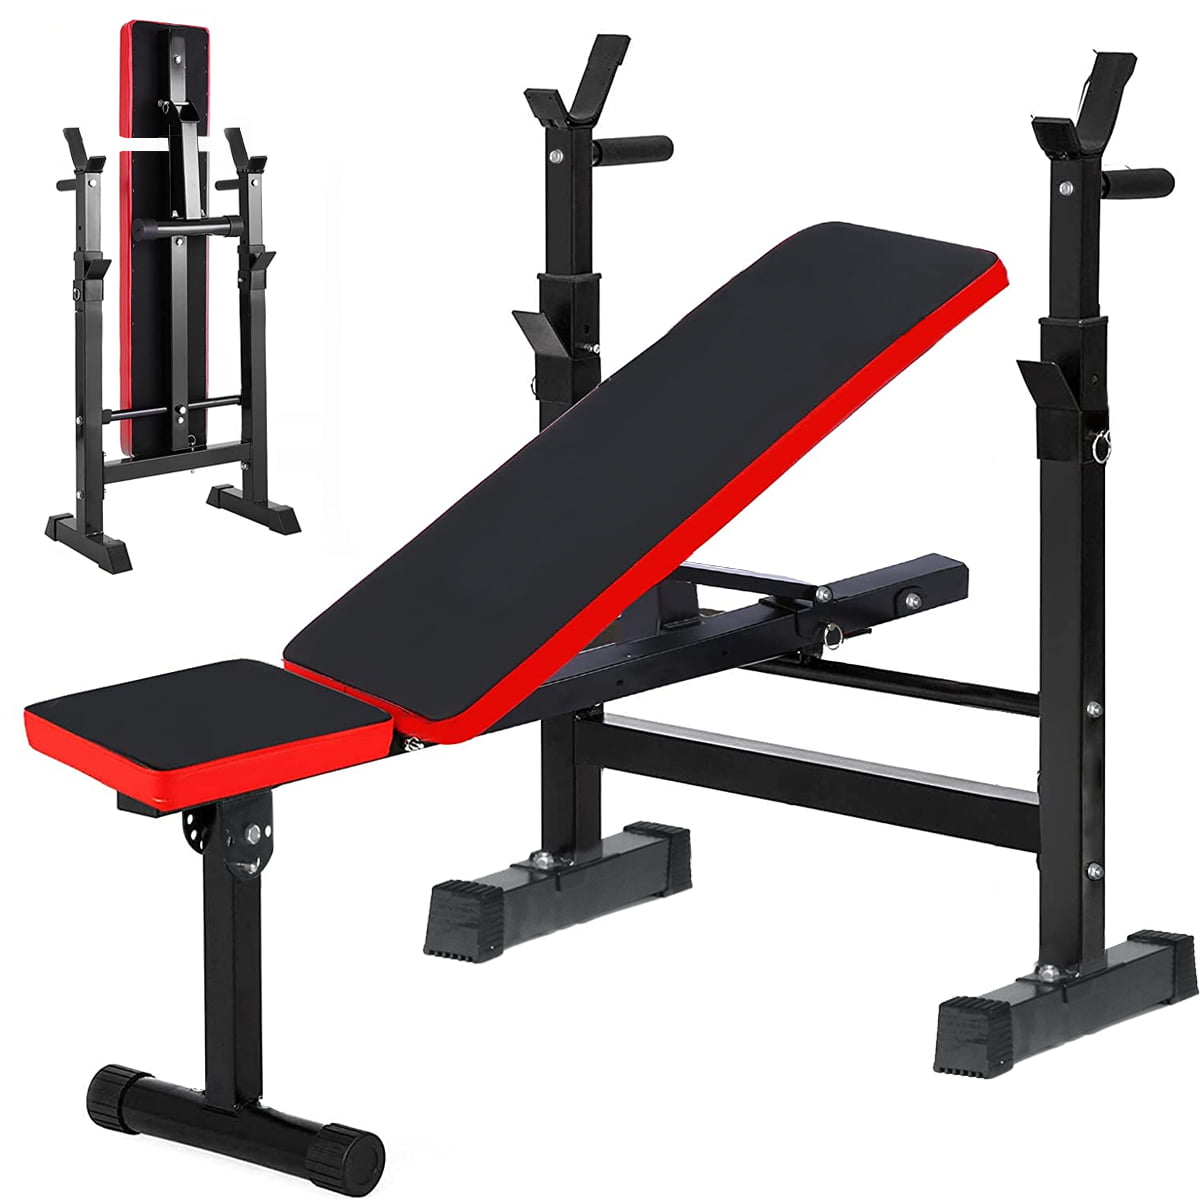 Fitness Bench With Weight Set 140lb Gym Barbell Equipment Home Workout Exercise 